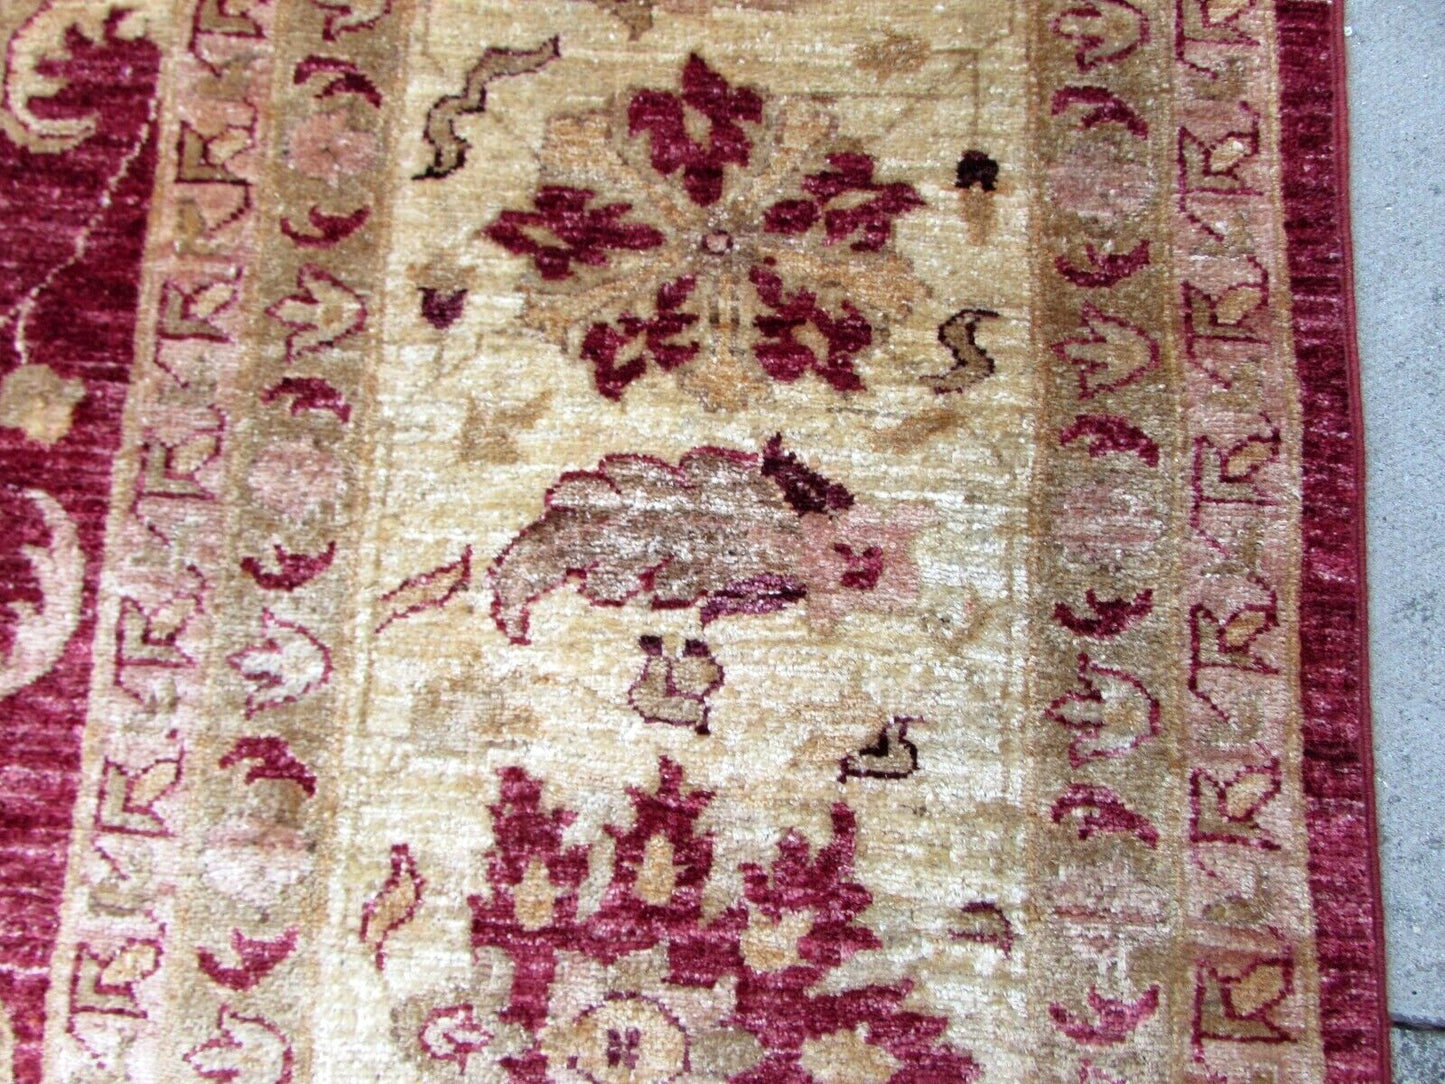 Detailed shot of the rug's texture and pile height